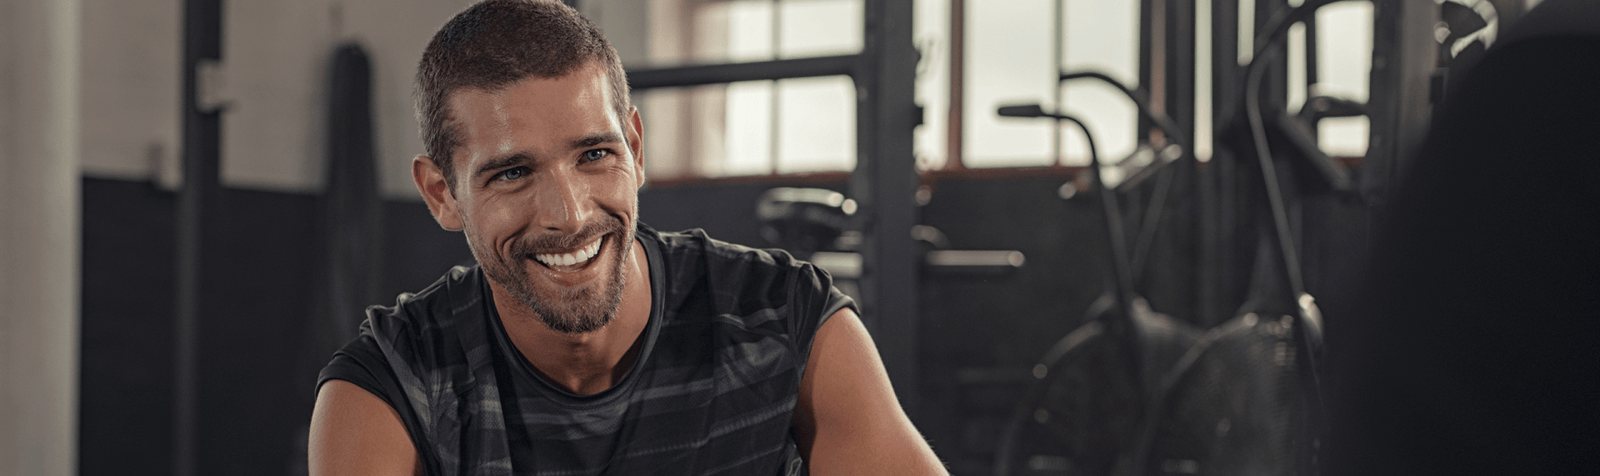 7 great high-intensity exercises to get you started now